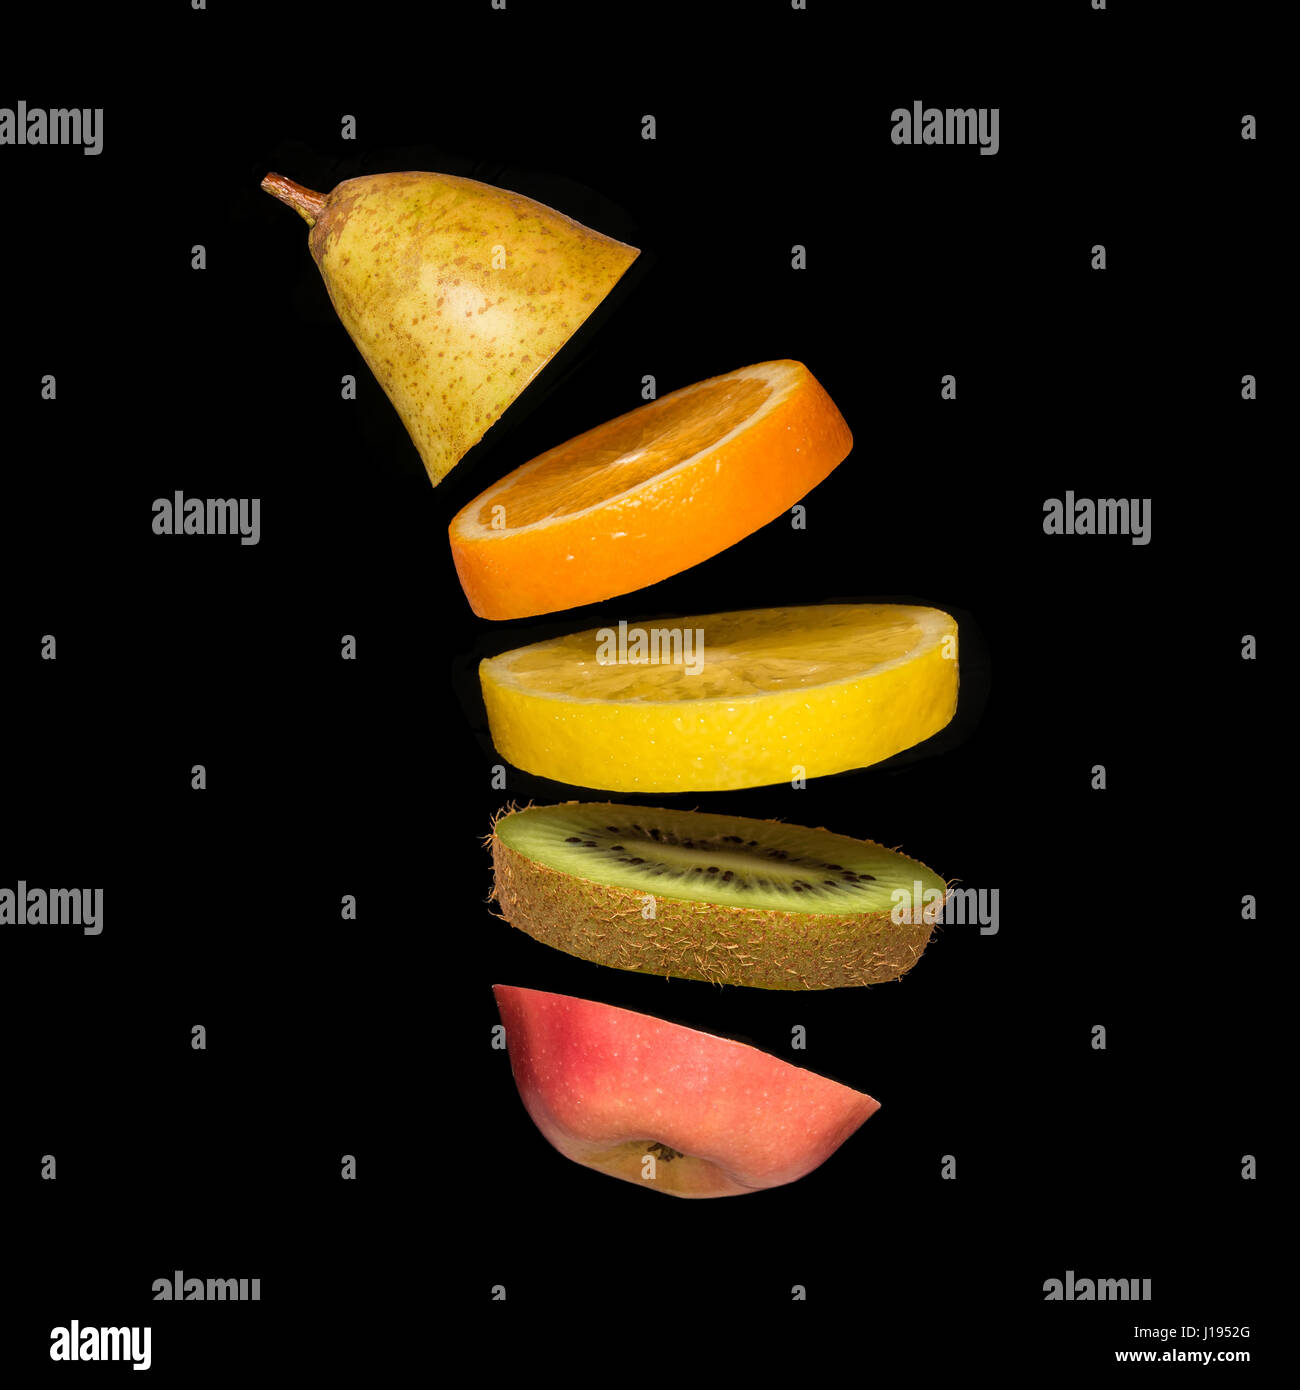 Surrealistic creative concept with flying fruit. Pieces of pear, orange, lemon, kiwi and apple on a black background Stock Photo